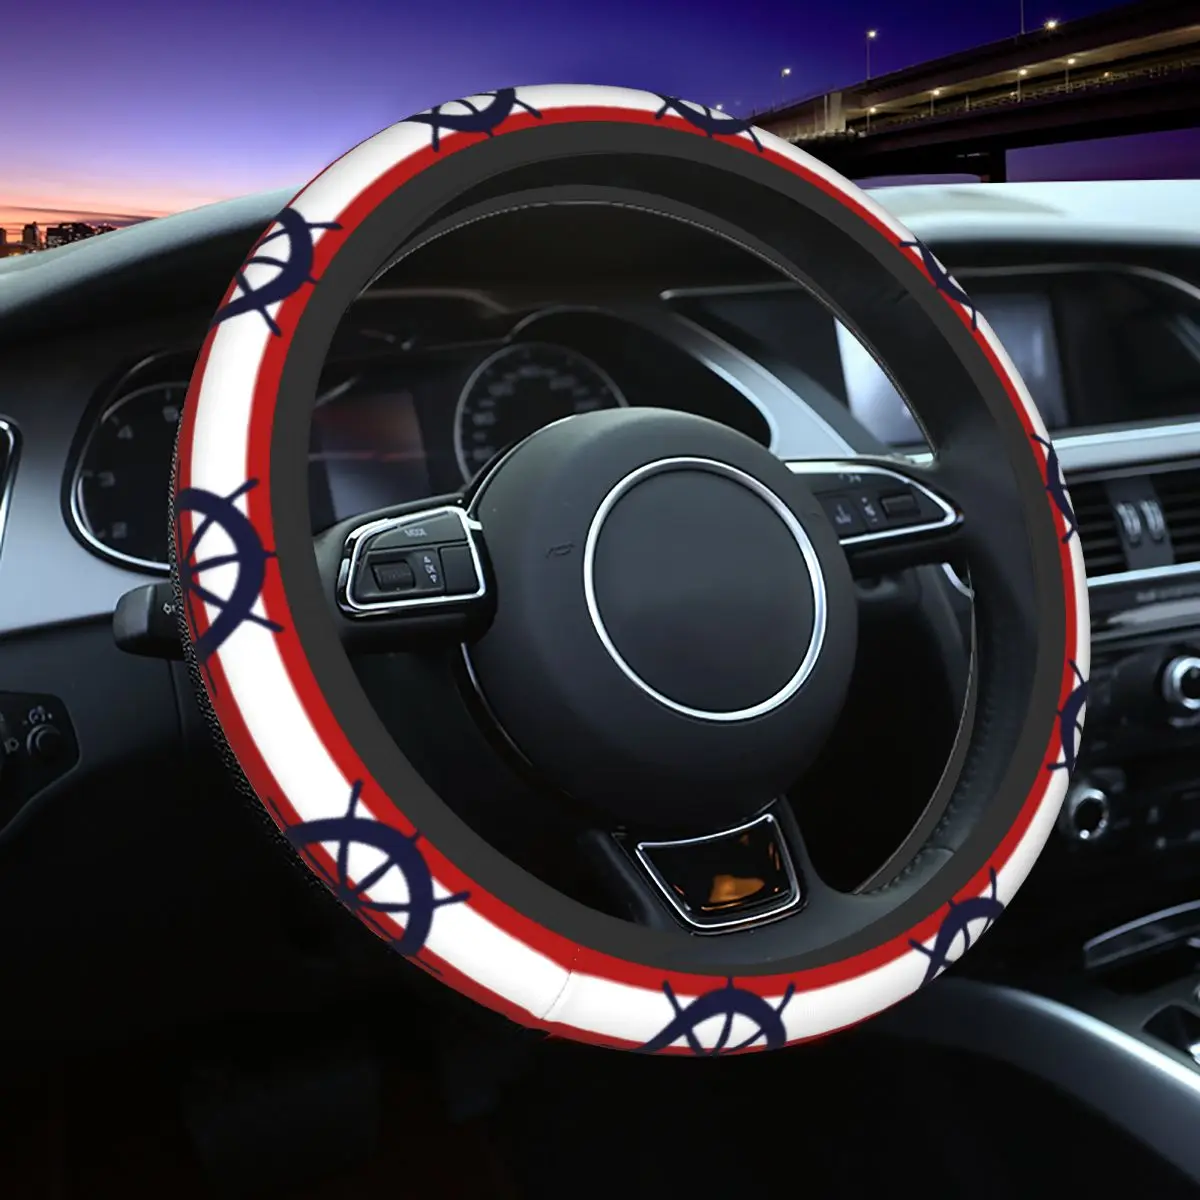 

38cm Car Steering Wheel Cover Nordic Nautical Anchor Rudder Navy Braid On The Steering Wheel Cover Auto Decor Car Accessories